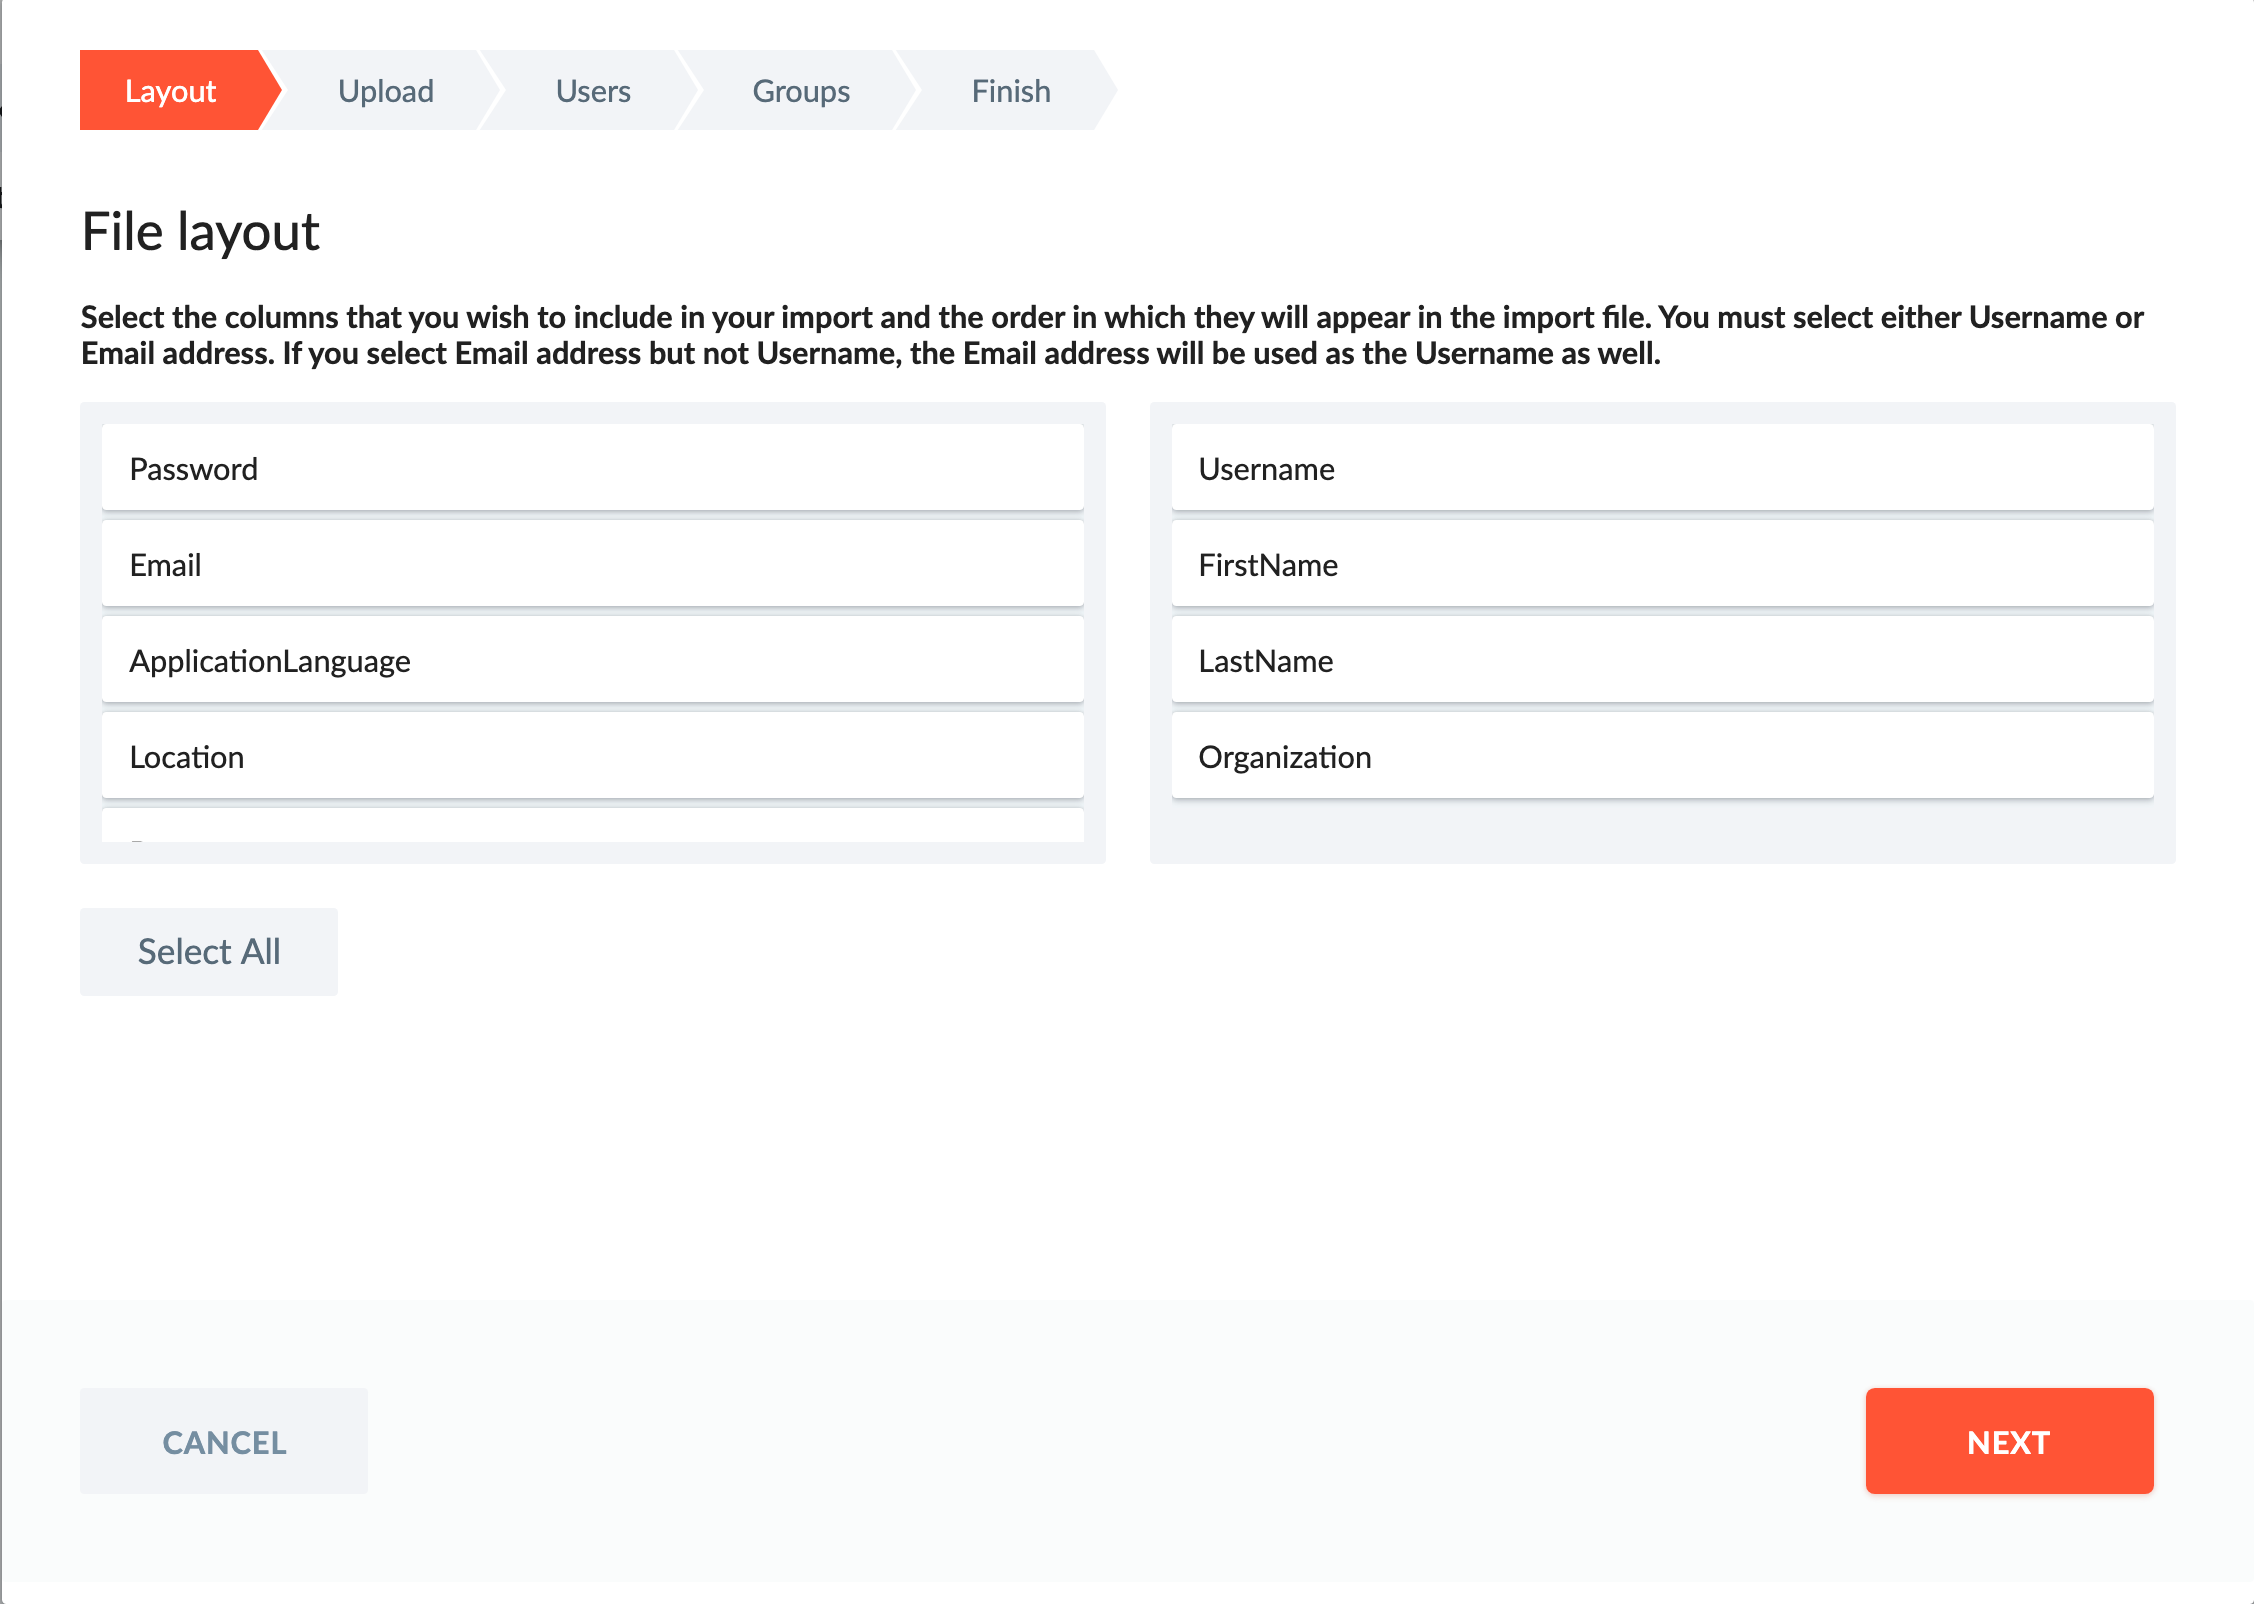 Checkbox Survey Software - Full contact management with custom fields and import capabilities.